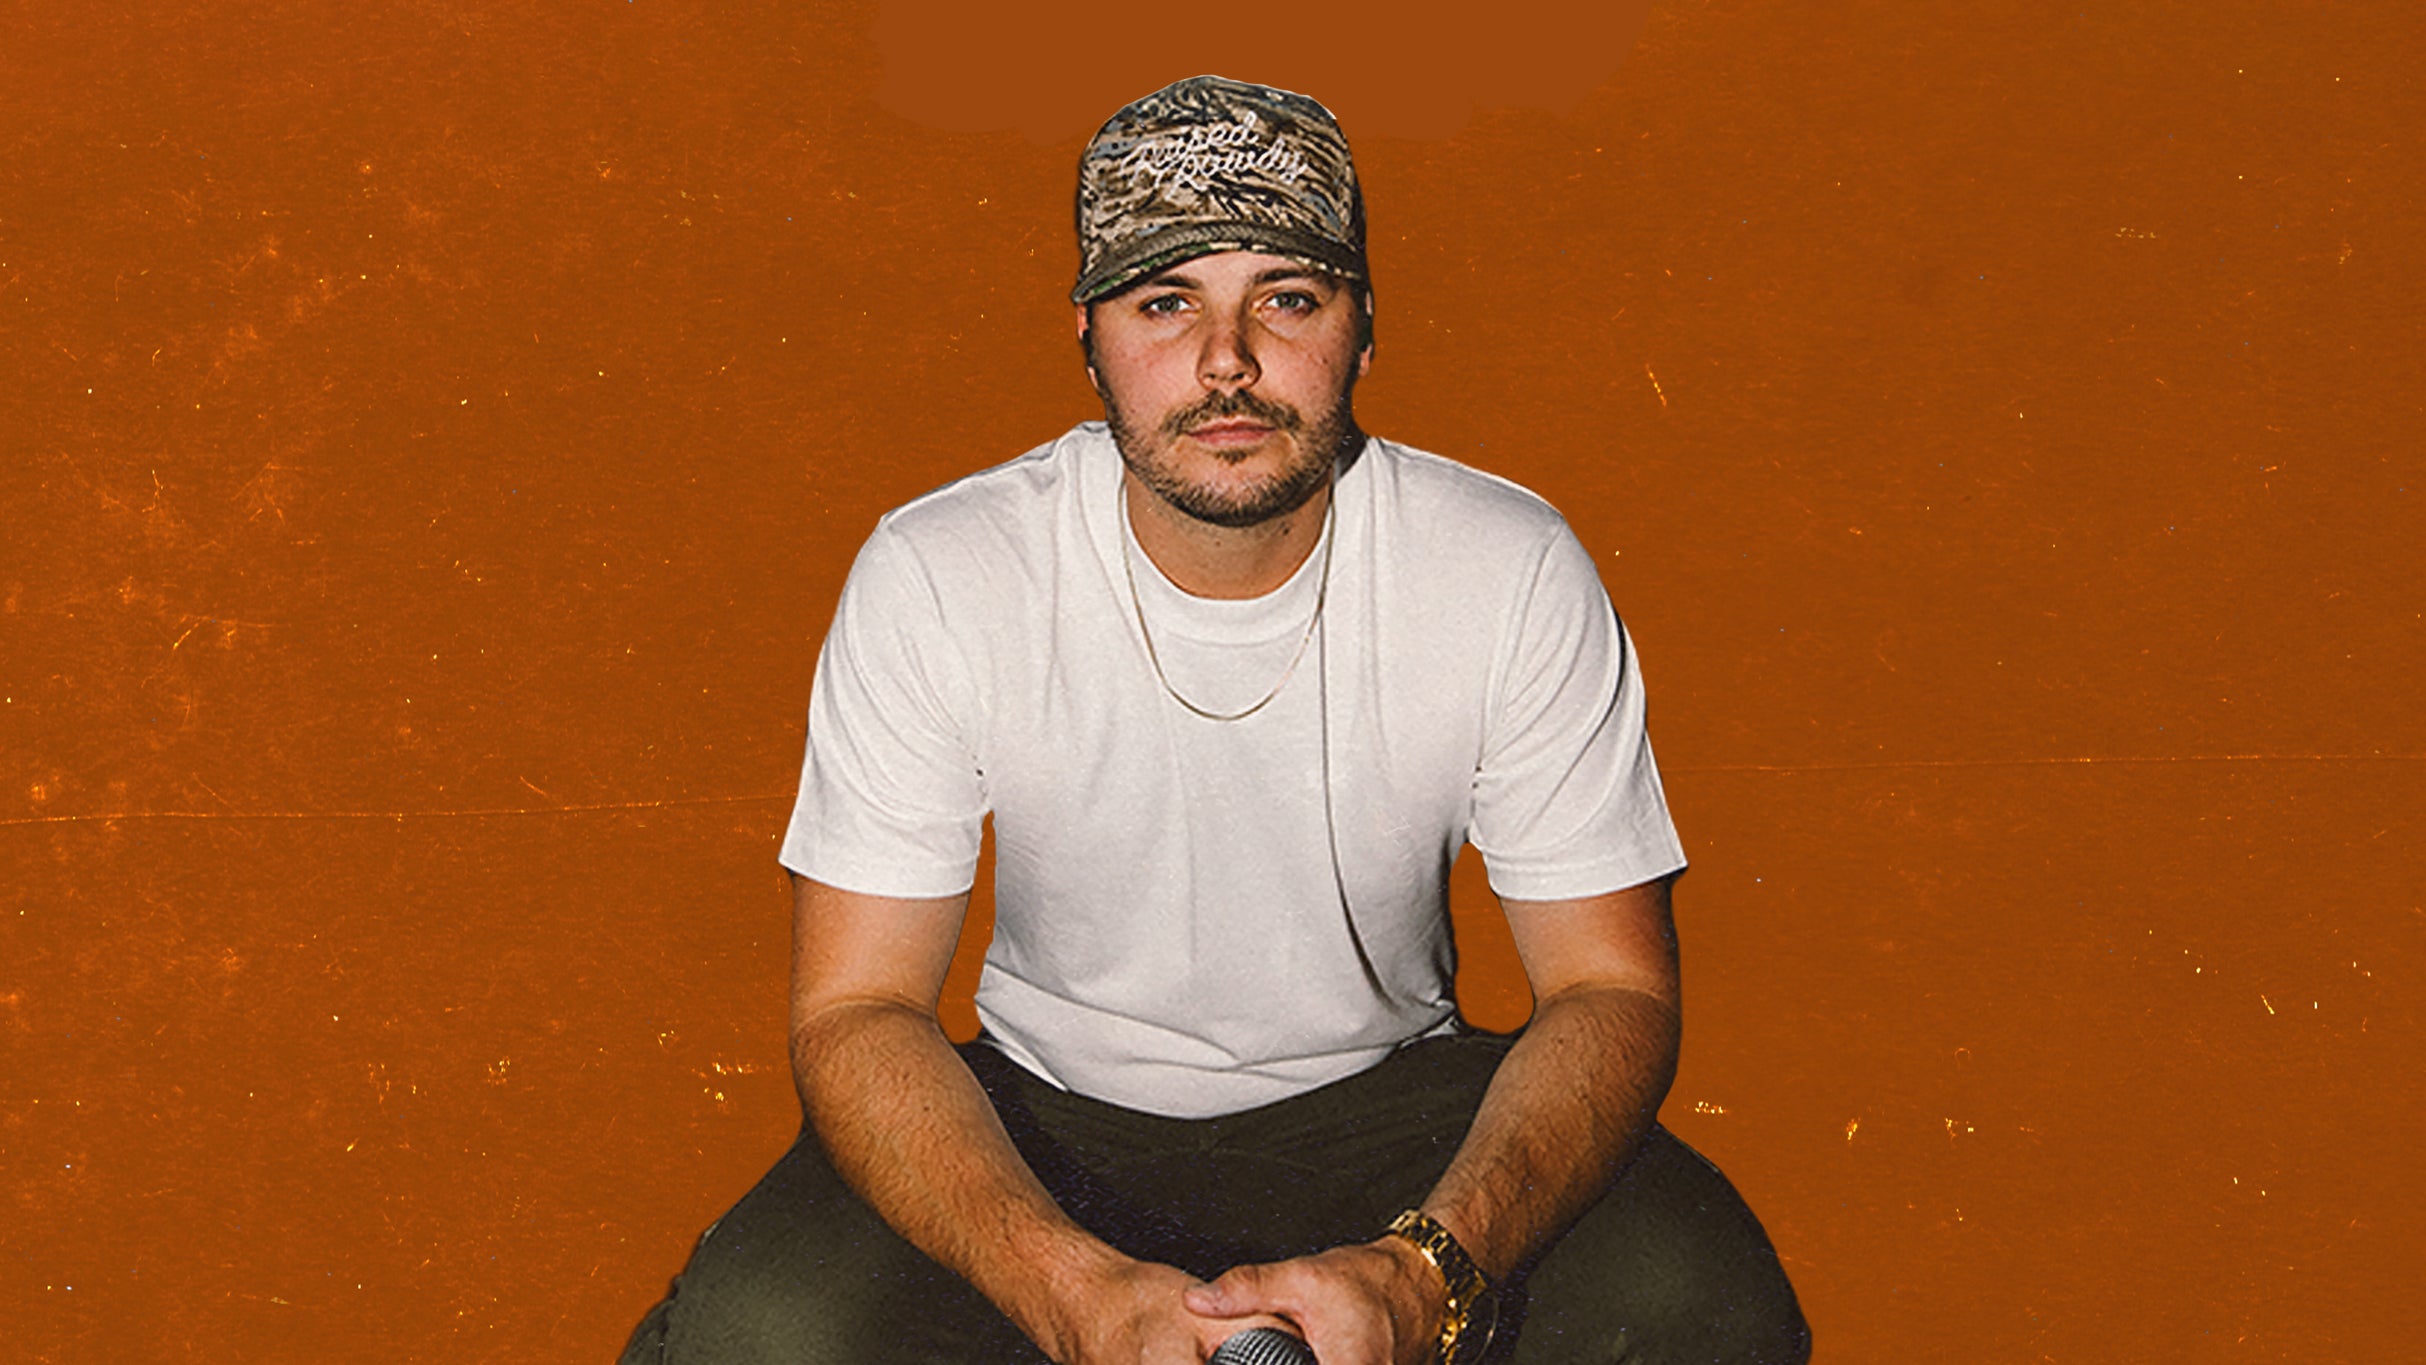 Josh Ross: The Trouble Tour in Montreal promo photo for Forfait VIP Package presale offer code